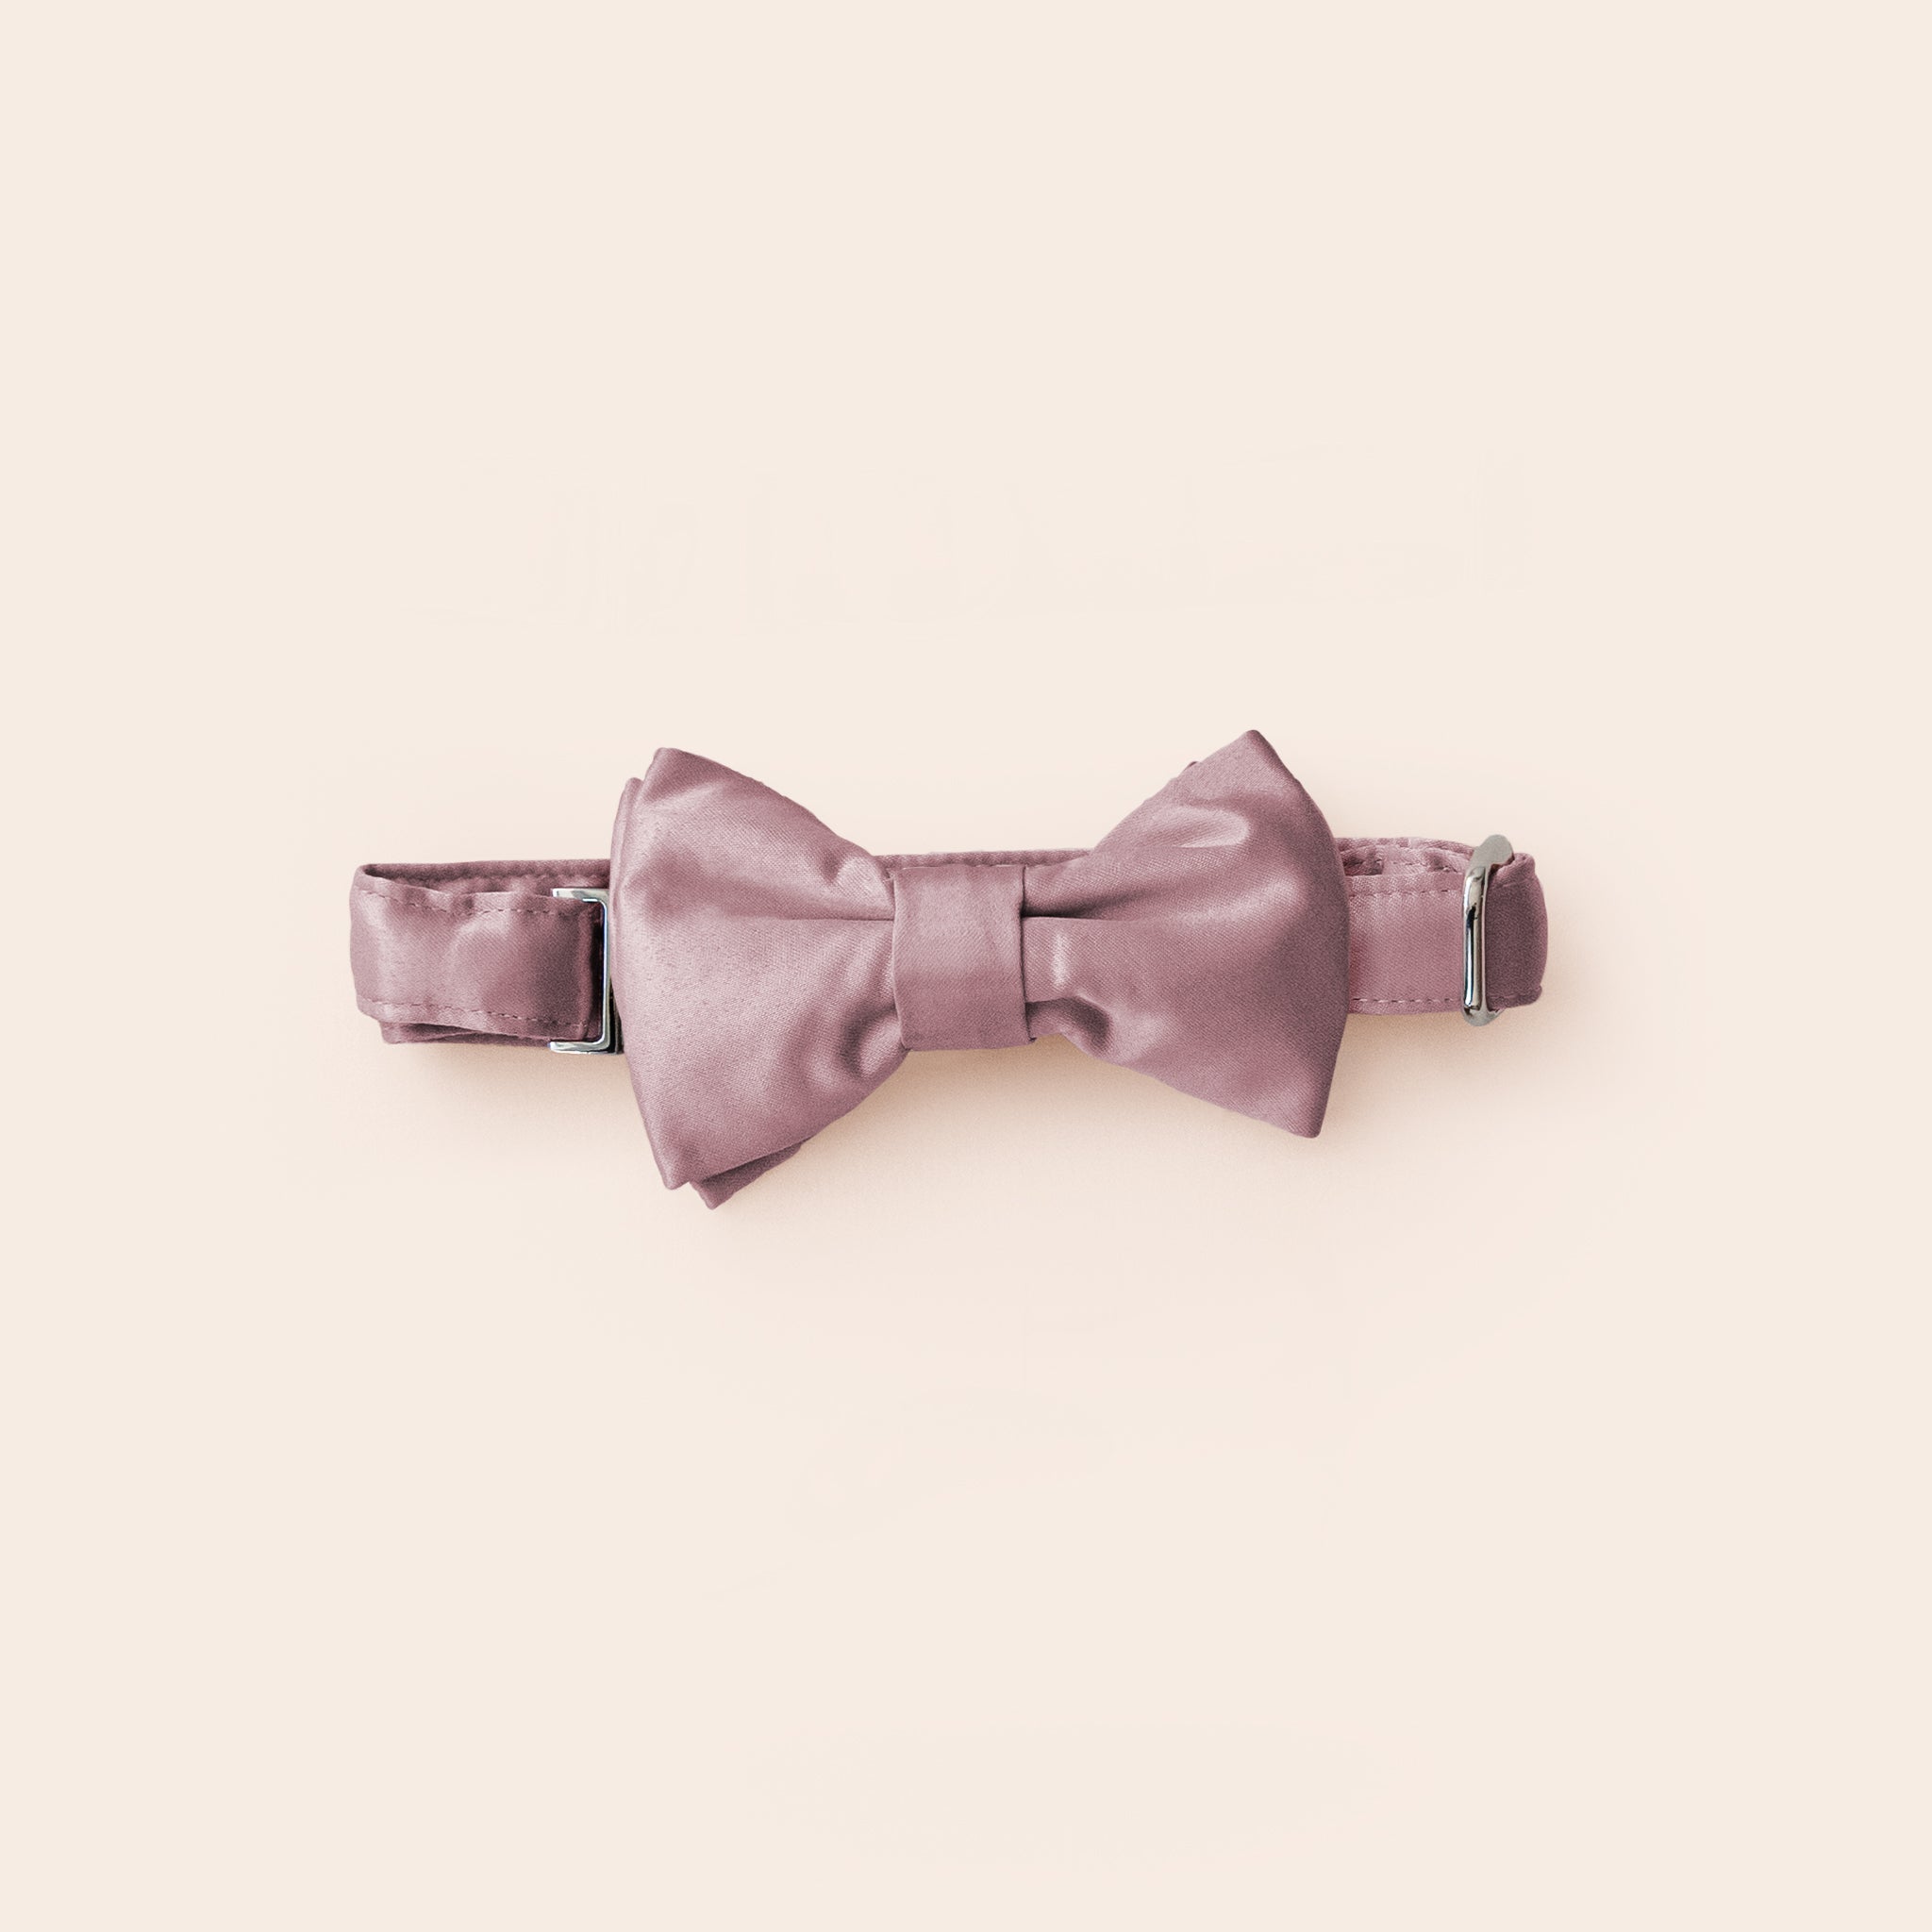 Muggsy Dog Bow Tie Collar in Dark Mauve by Birdy Grey, front view